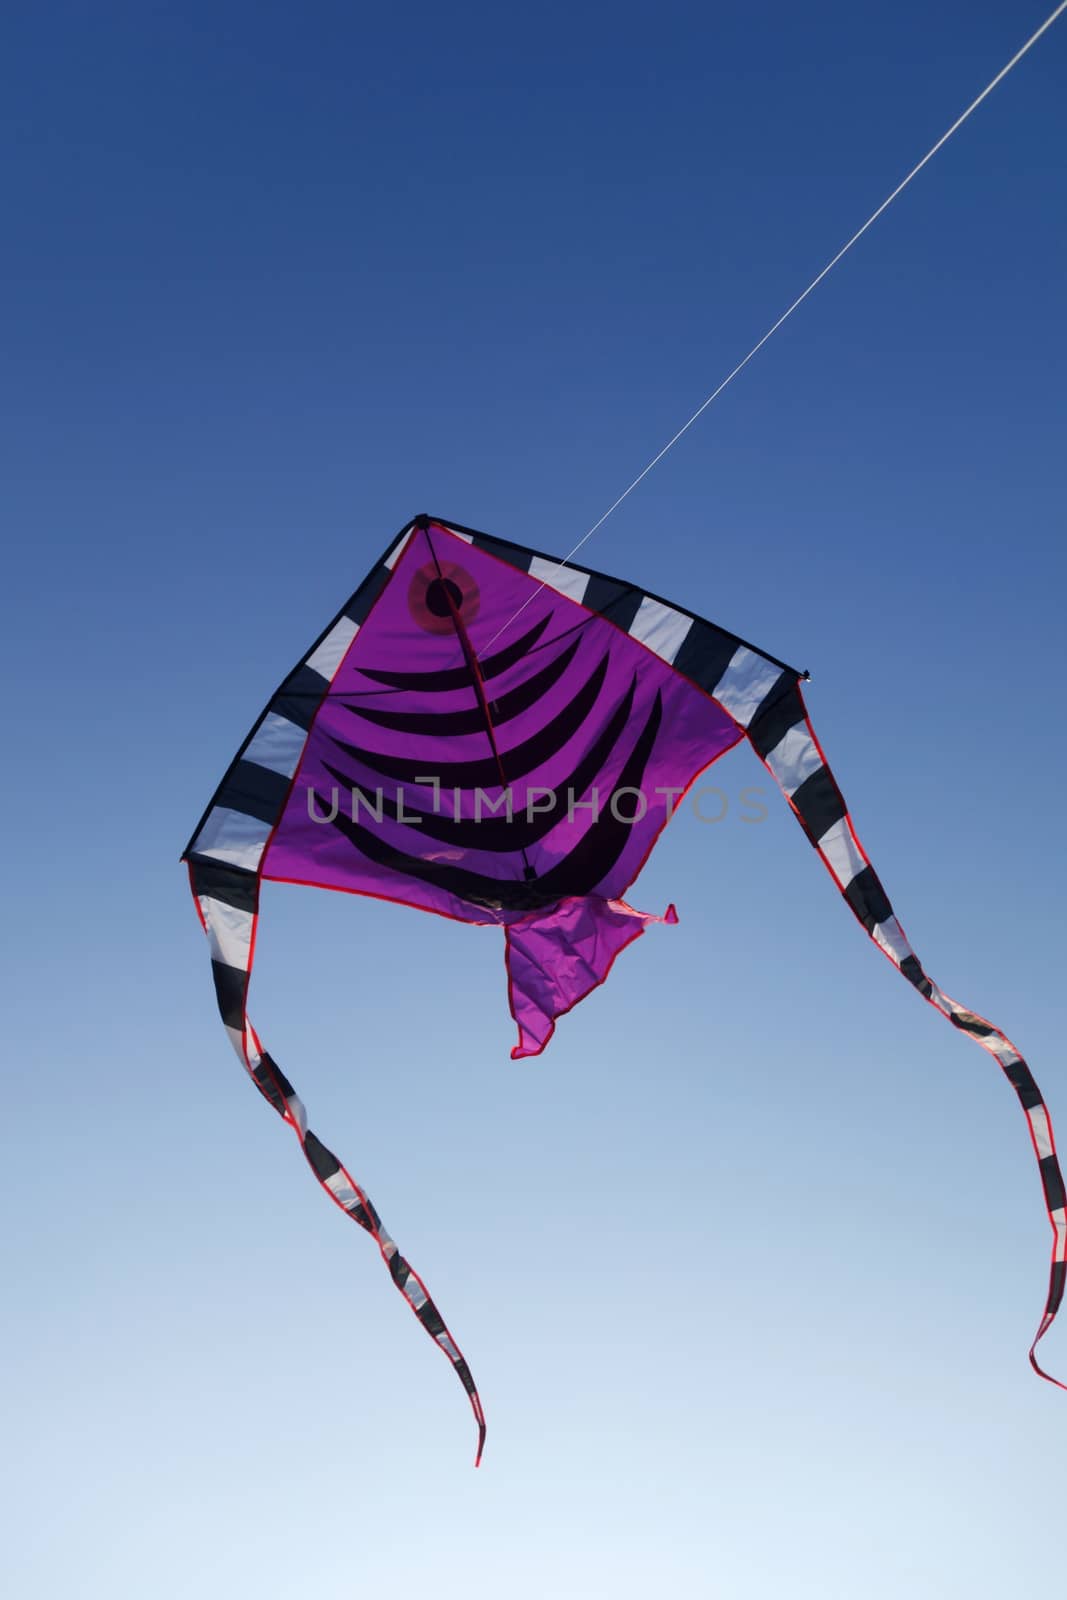 Colorful kite flying up in blue sky by tang90246